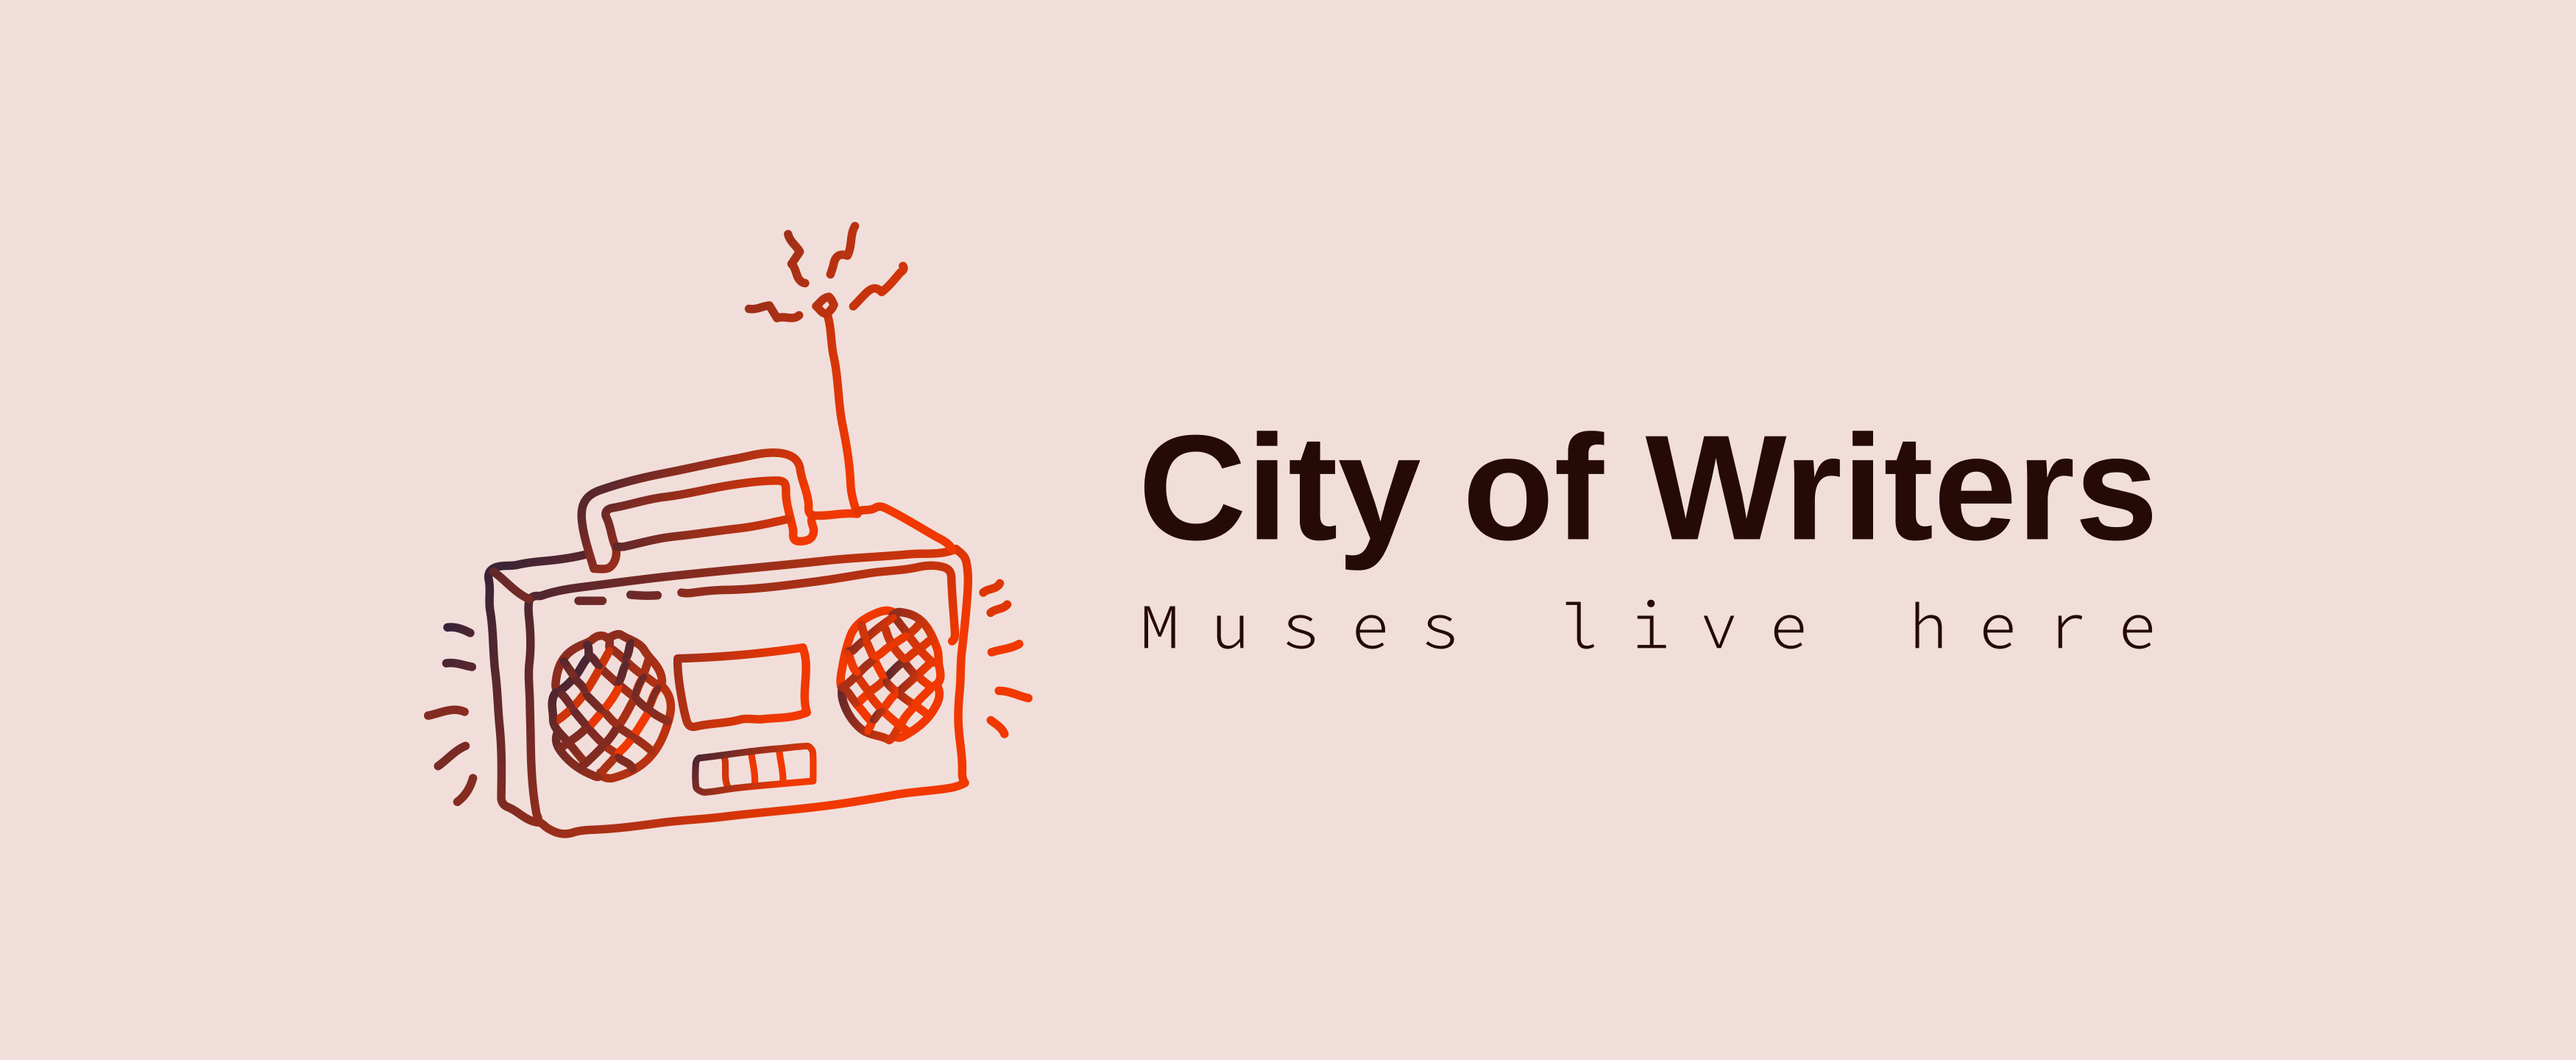 boombox illustration on a peach-colored background with the text: city of writers, muses live here, next to it